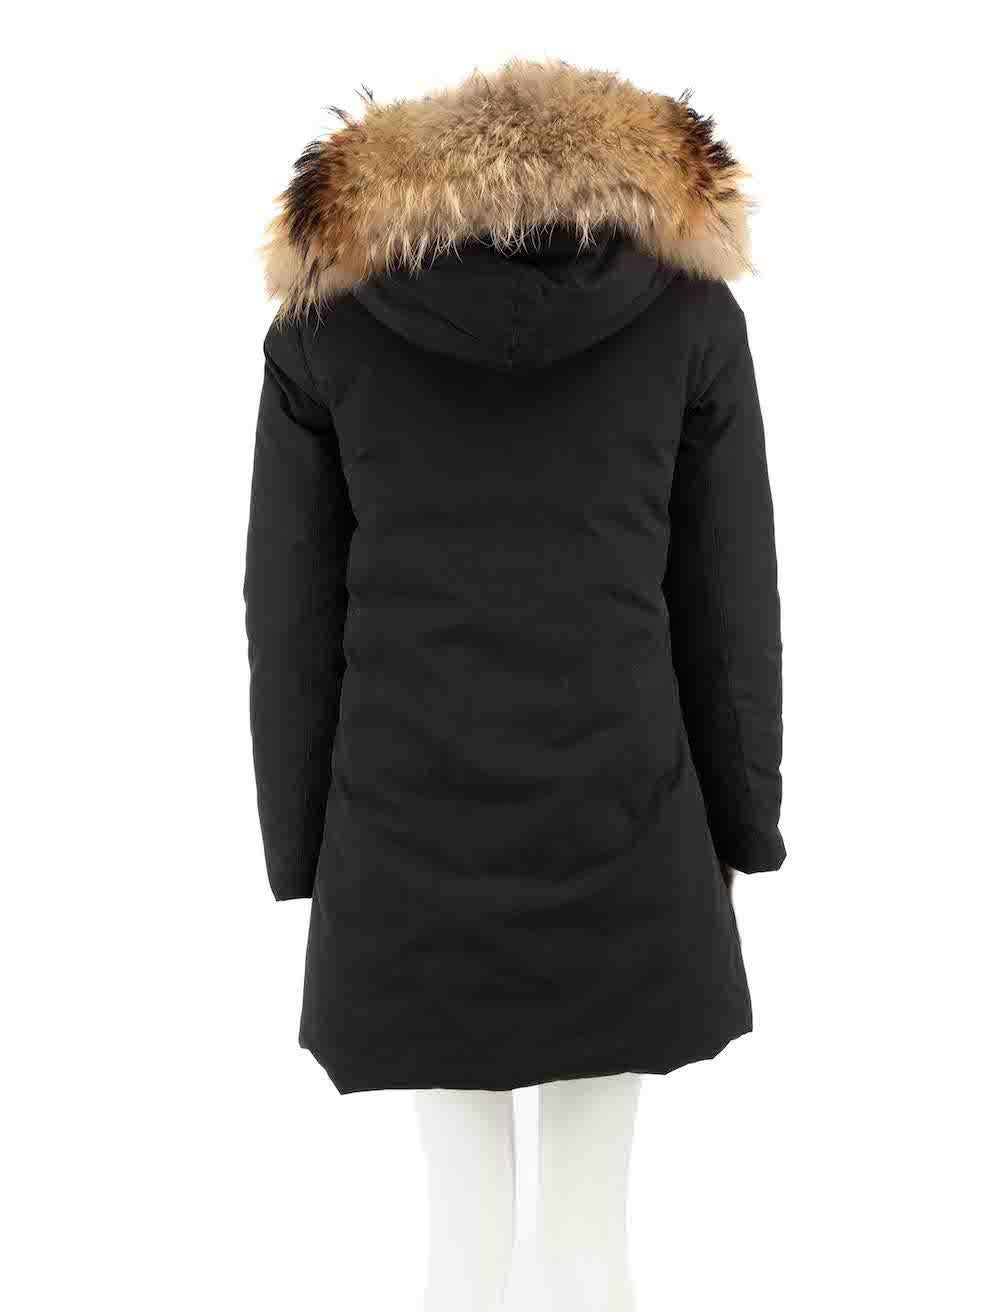 Moncler Black Padded Fur Trim Parka Coat Size S In Good Condition For Sale In London, GB